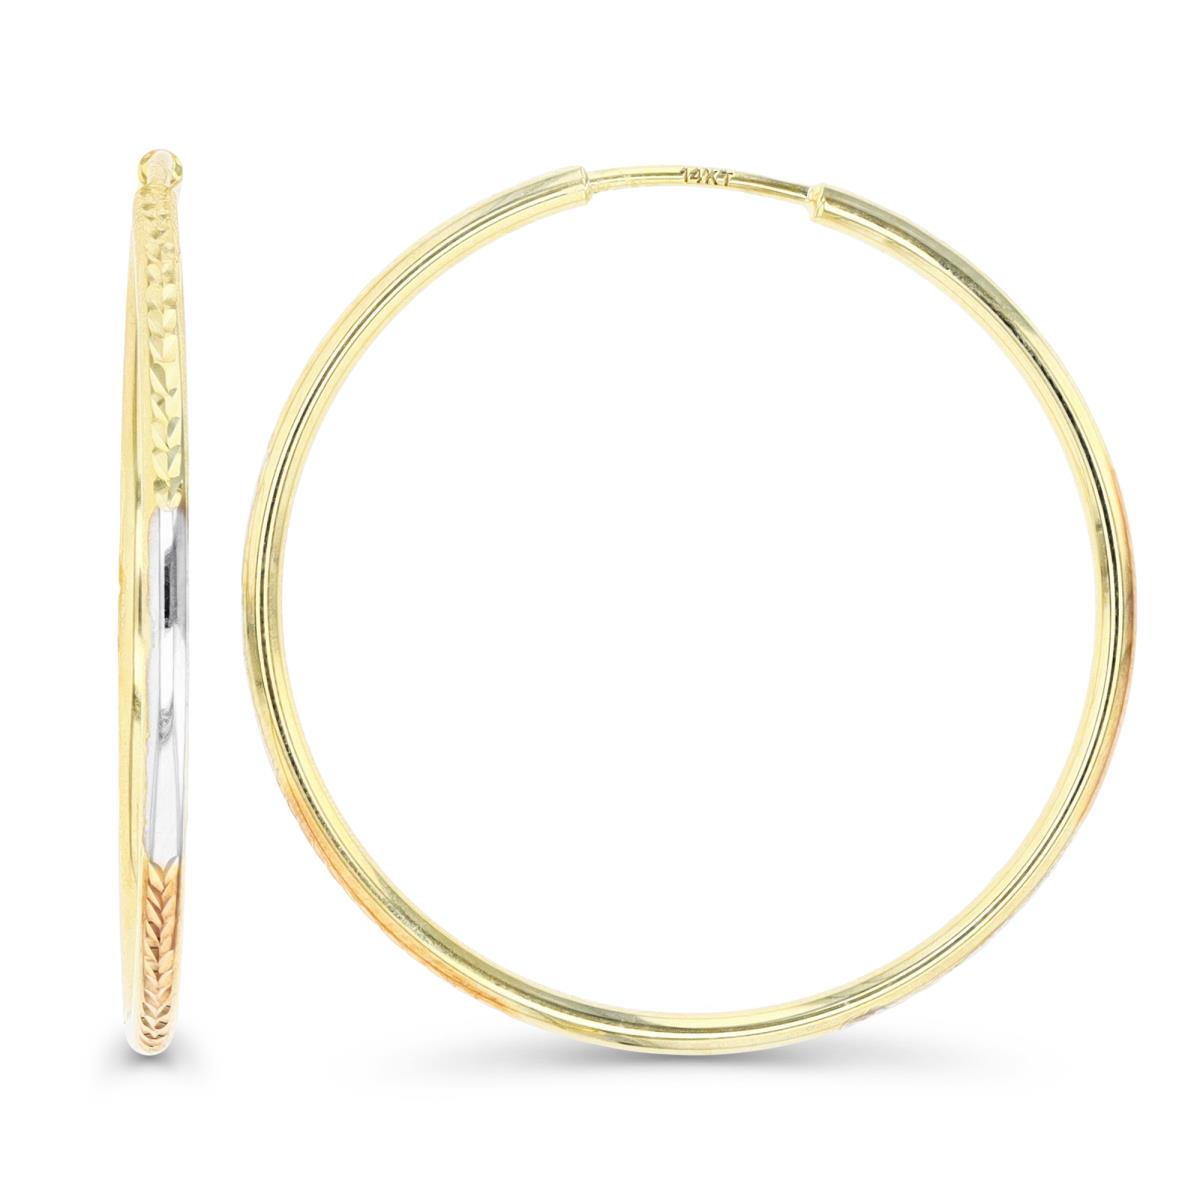 14K Gold Yellow Tri-Color 35MM Diamond Cut and Polished Hoop Earring